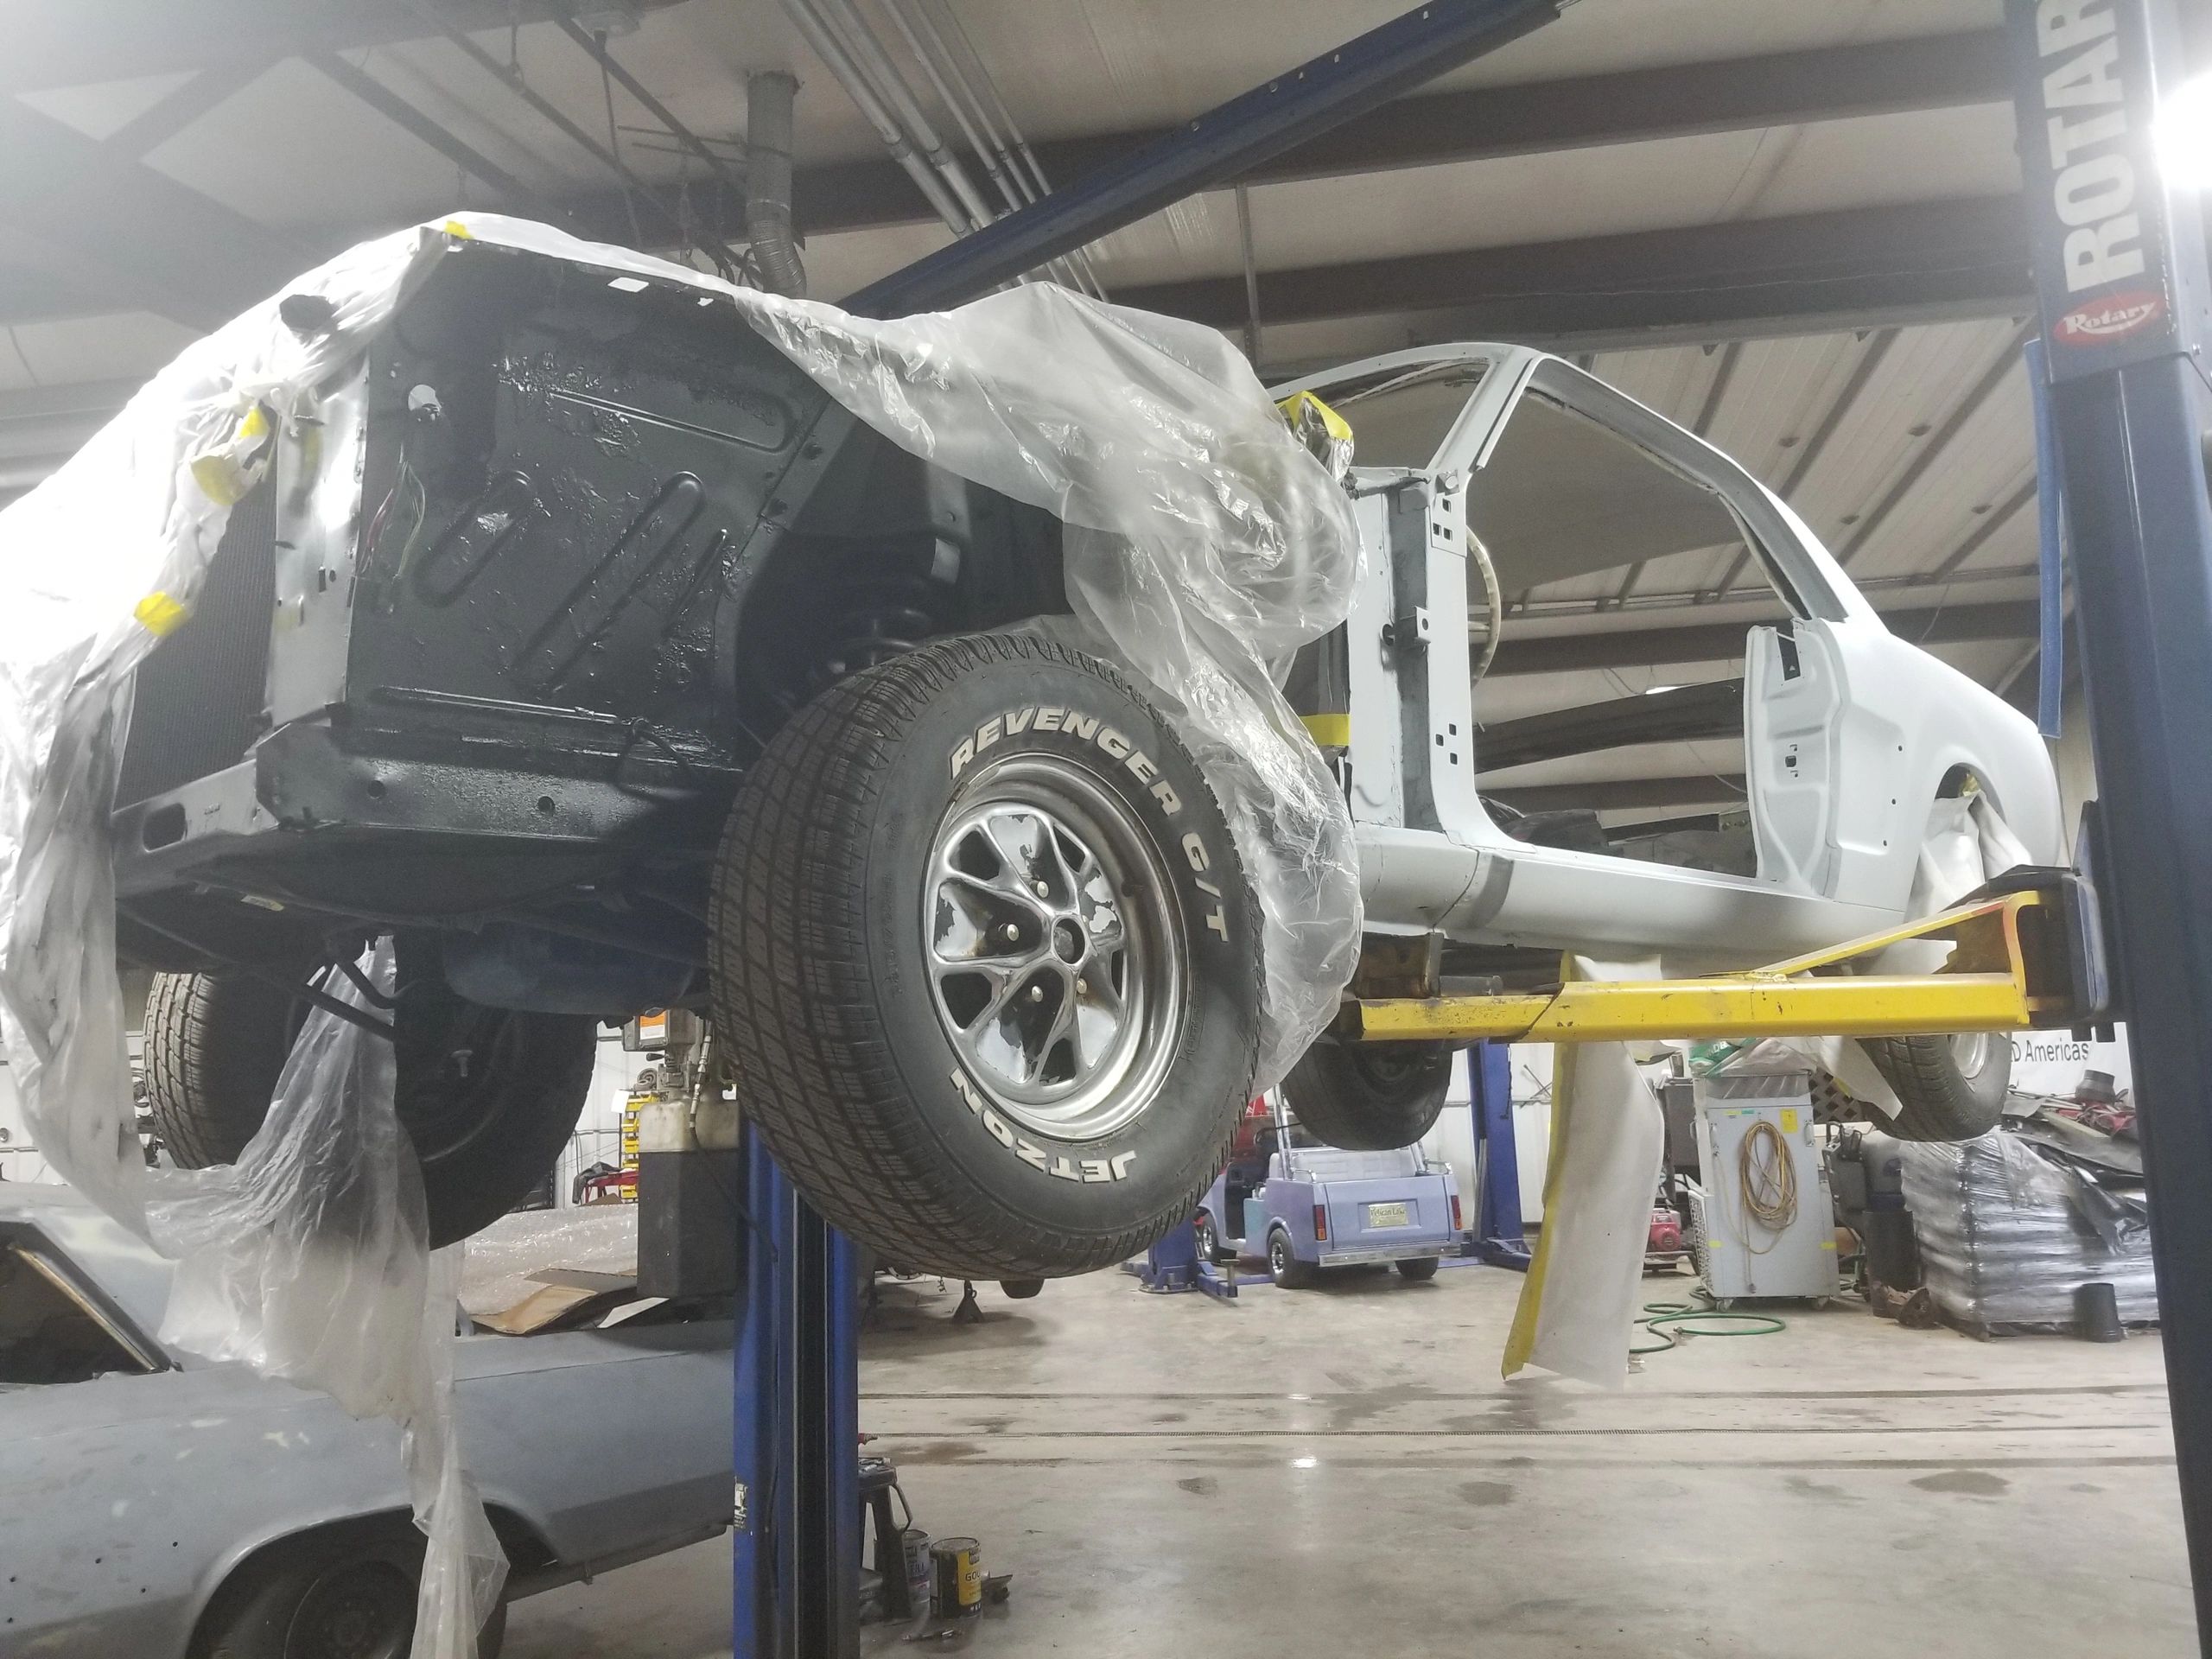 Mustang Restoration with ColorBond – Colorbond Paint